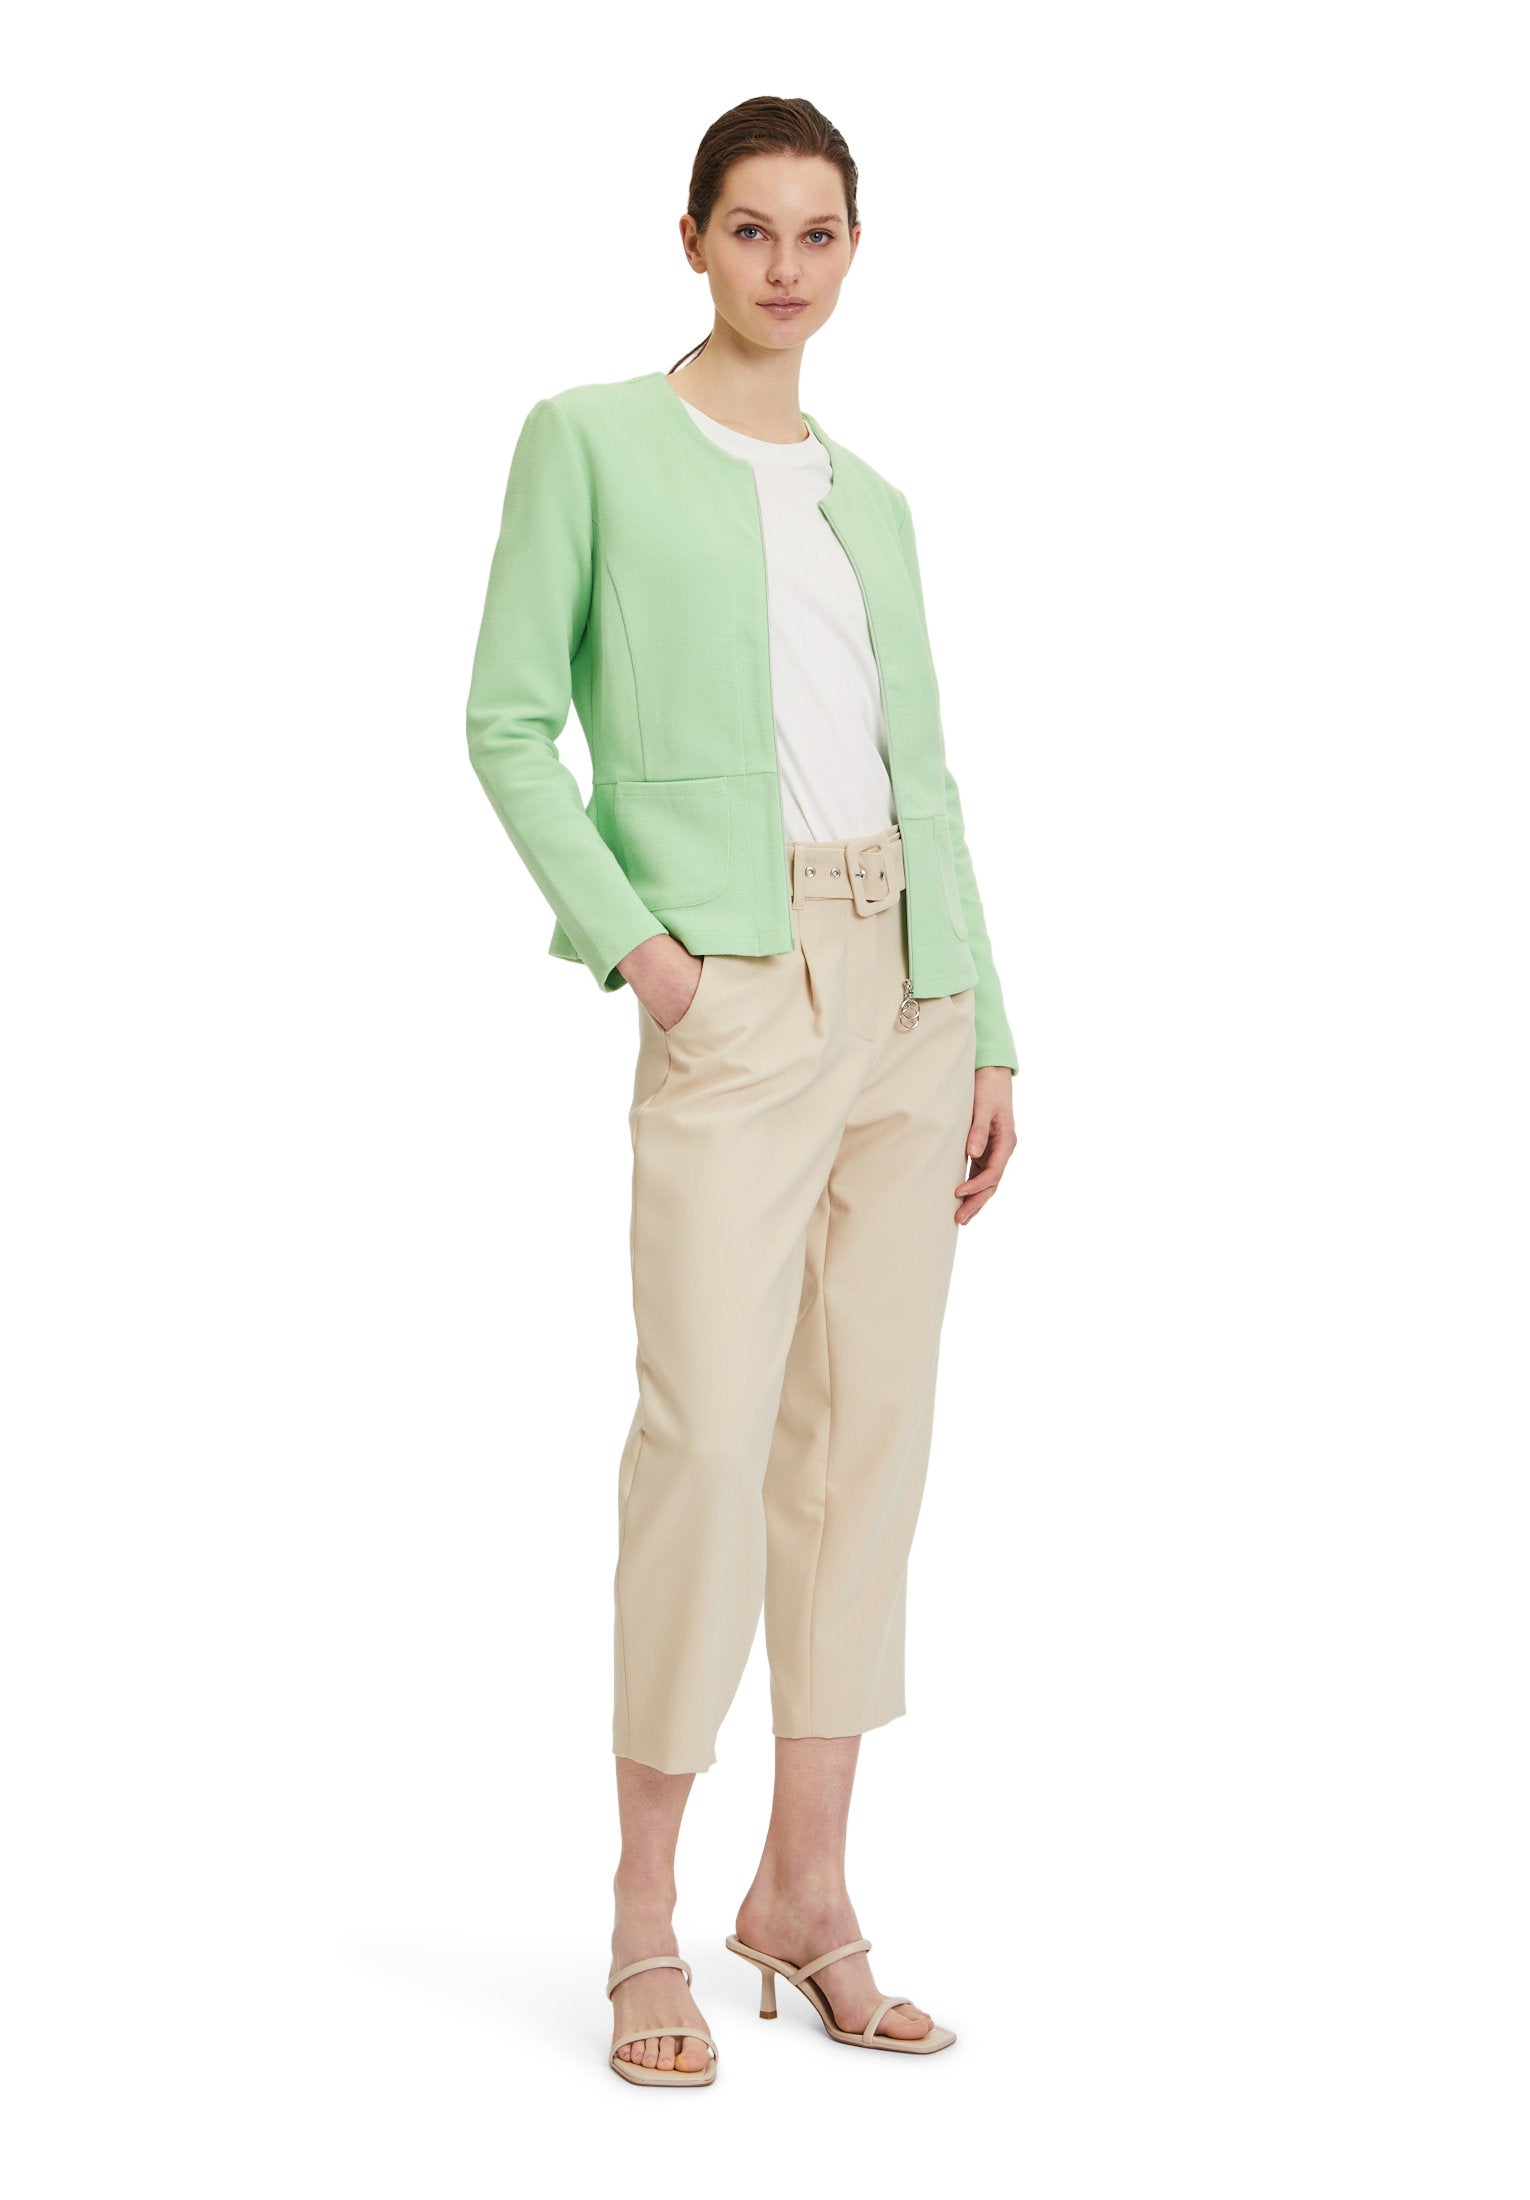 Pastel Green Fitted Blazer Style Cardigan_4340 1050_5242_05